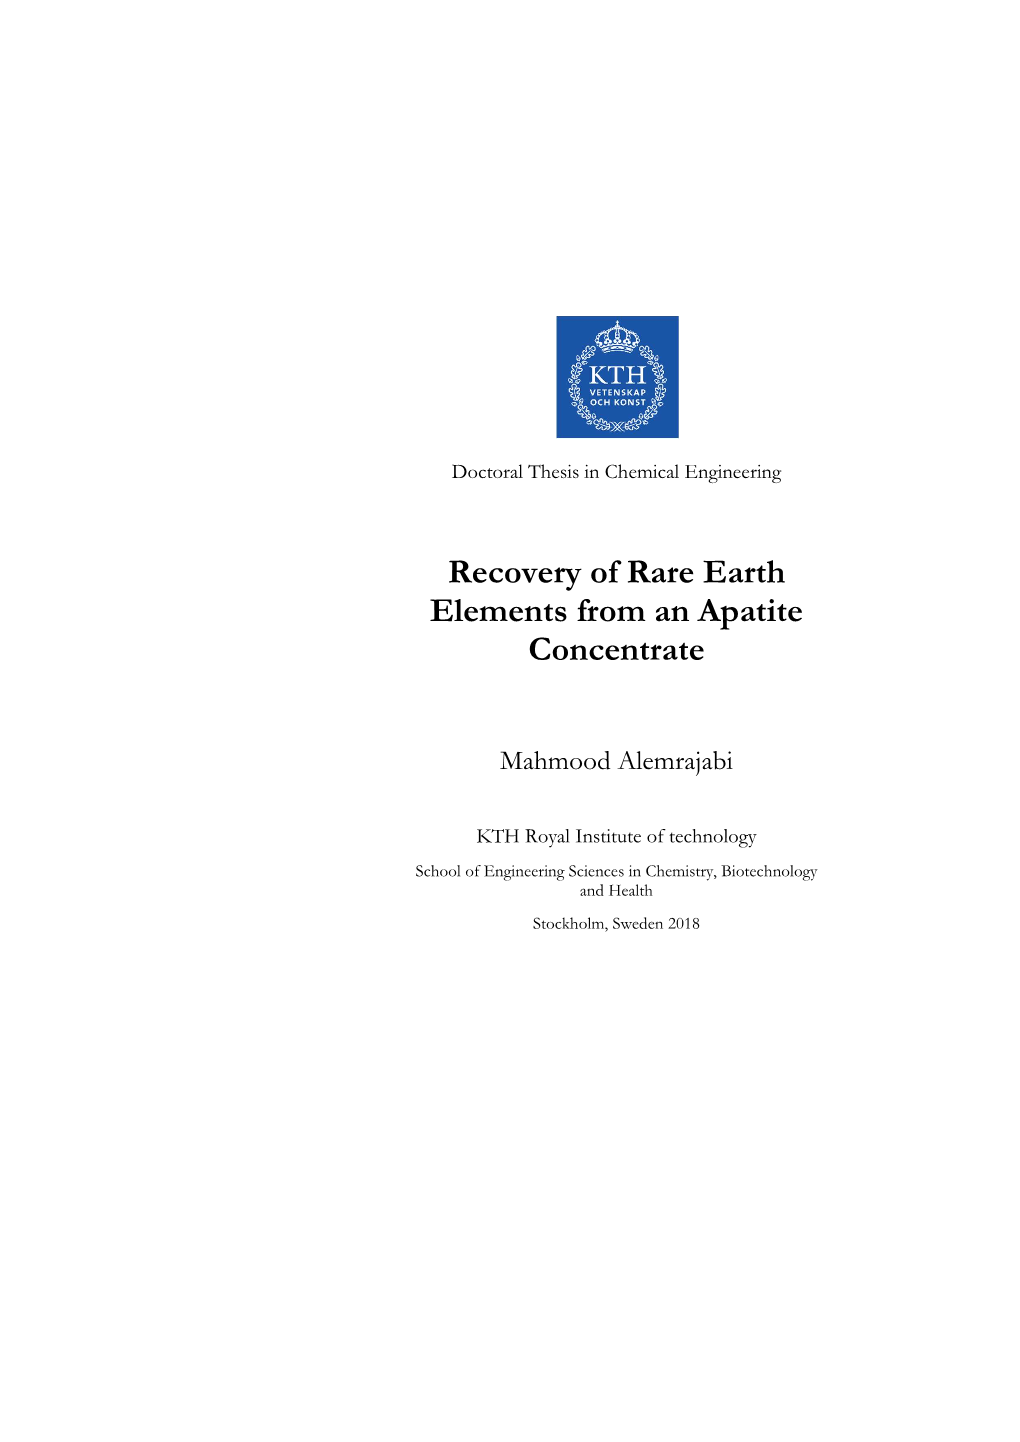 Recovery of Rare Earth Elements from an Apatite Concentrate